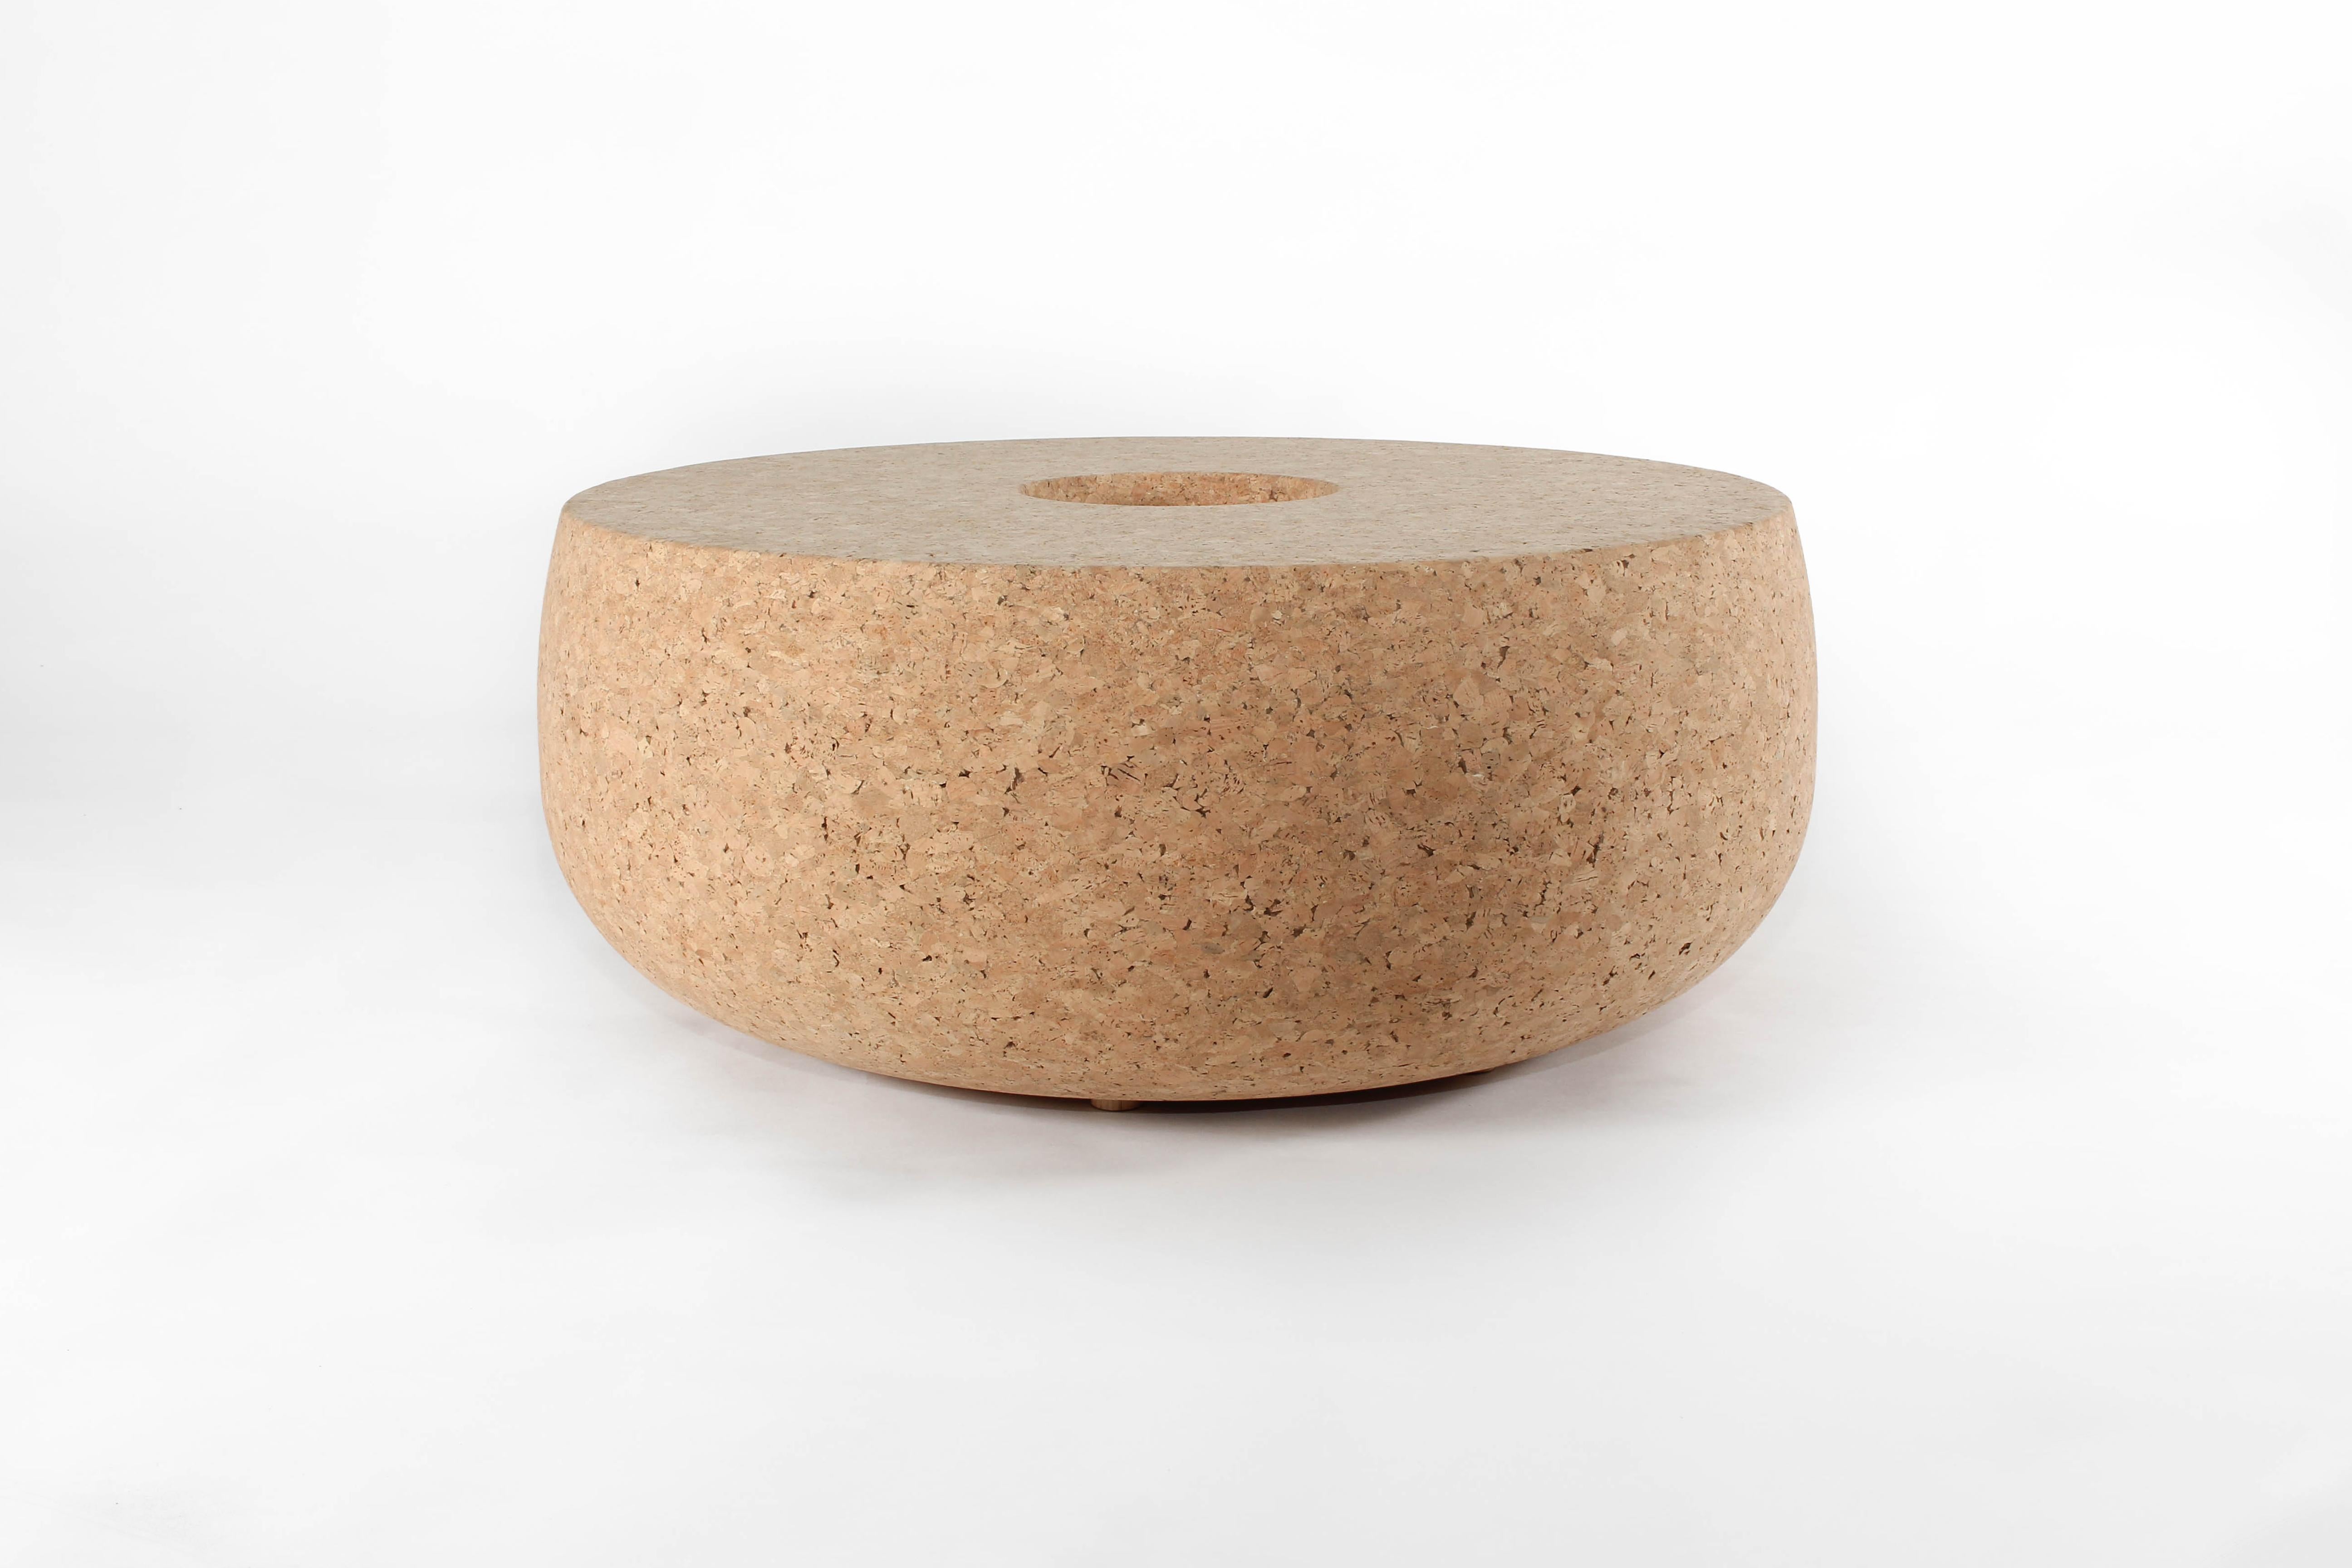 Doughnut Solid Cork Contemporary Sculptural Carved Coffee Table Bench Natural In New Condition For Sale In Bainbridge Island, WA